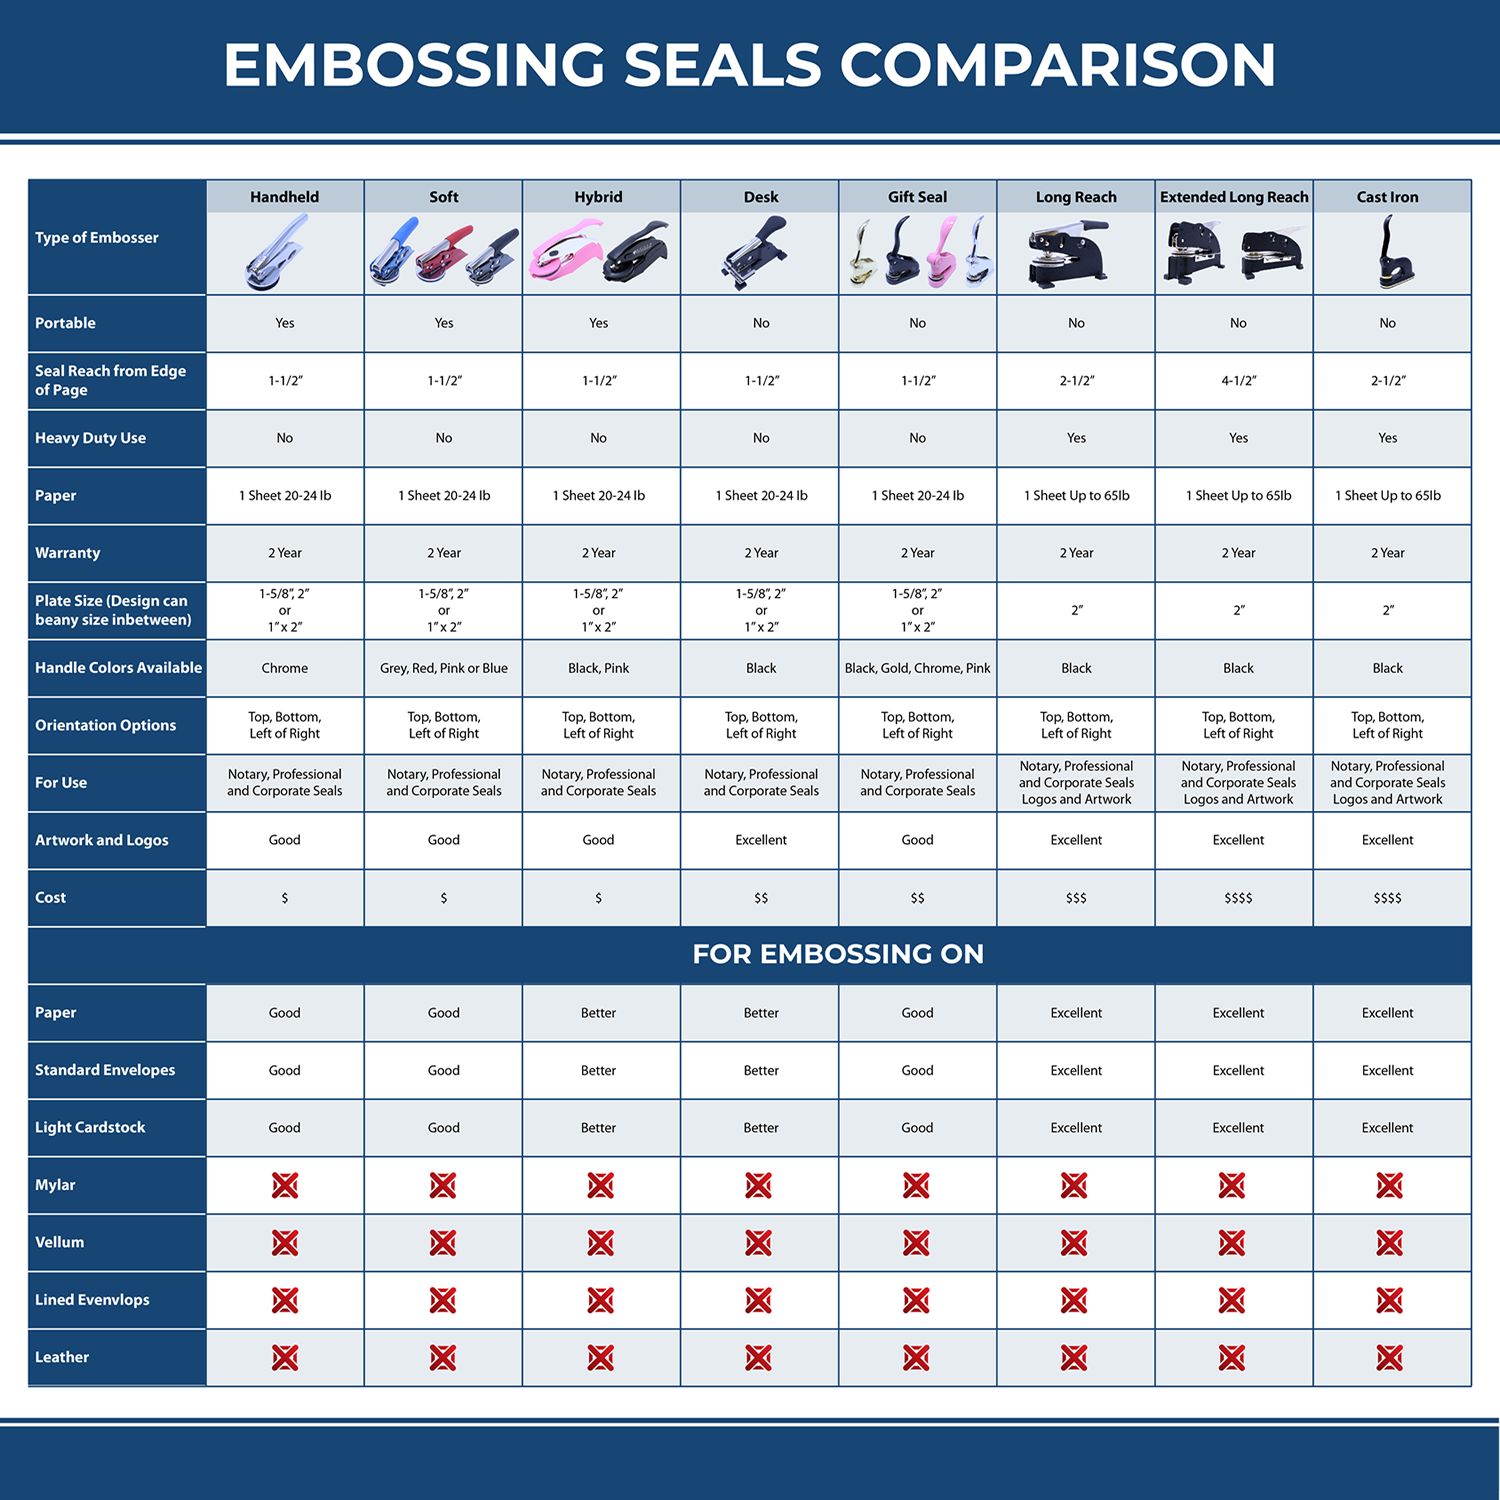 A comparison chart for the different types of mount models available for the Handheld New Mexico Land Surveyor Seal.